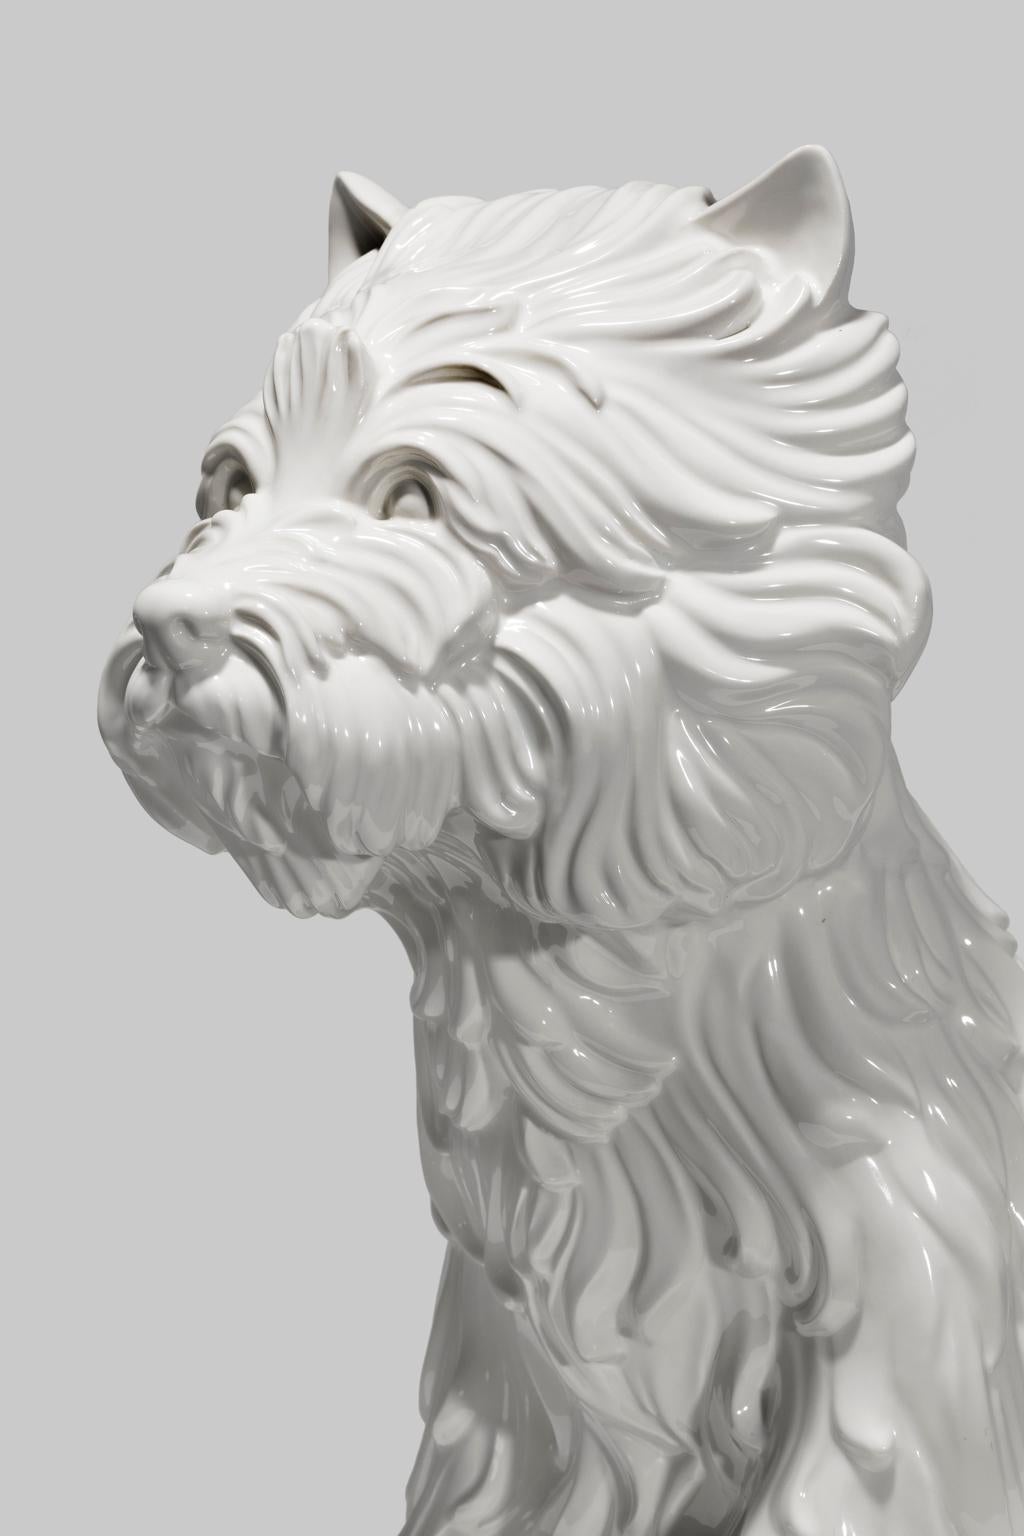 The Jeff Koons Puppy Vase is the famous white glazed porcelain sculpture of the acclaimed artist. This work is published by Art of this Century, New York and Paris and is signed, numbered and dated in the cast with foundry markings and accompanied